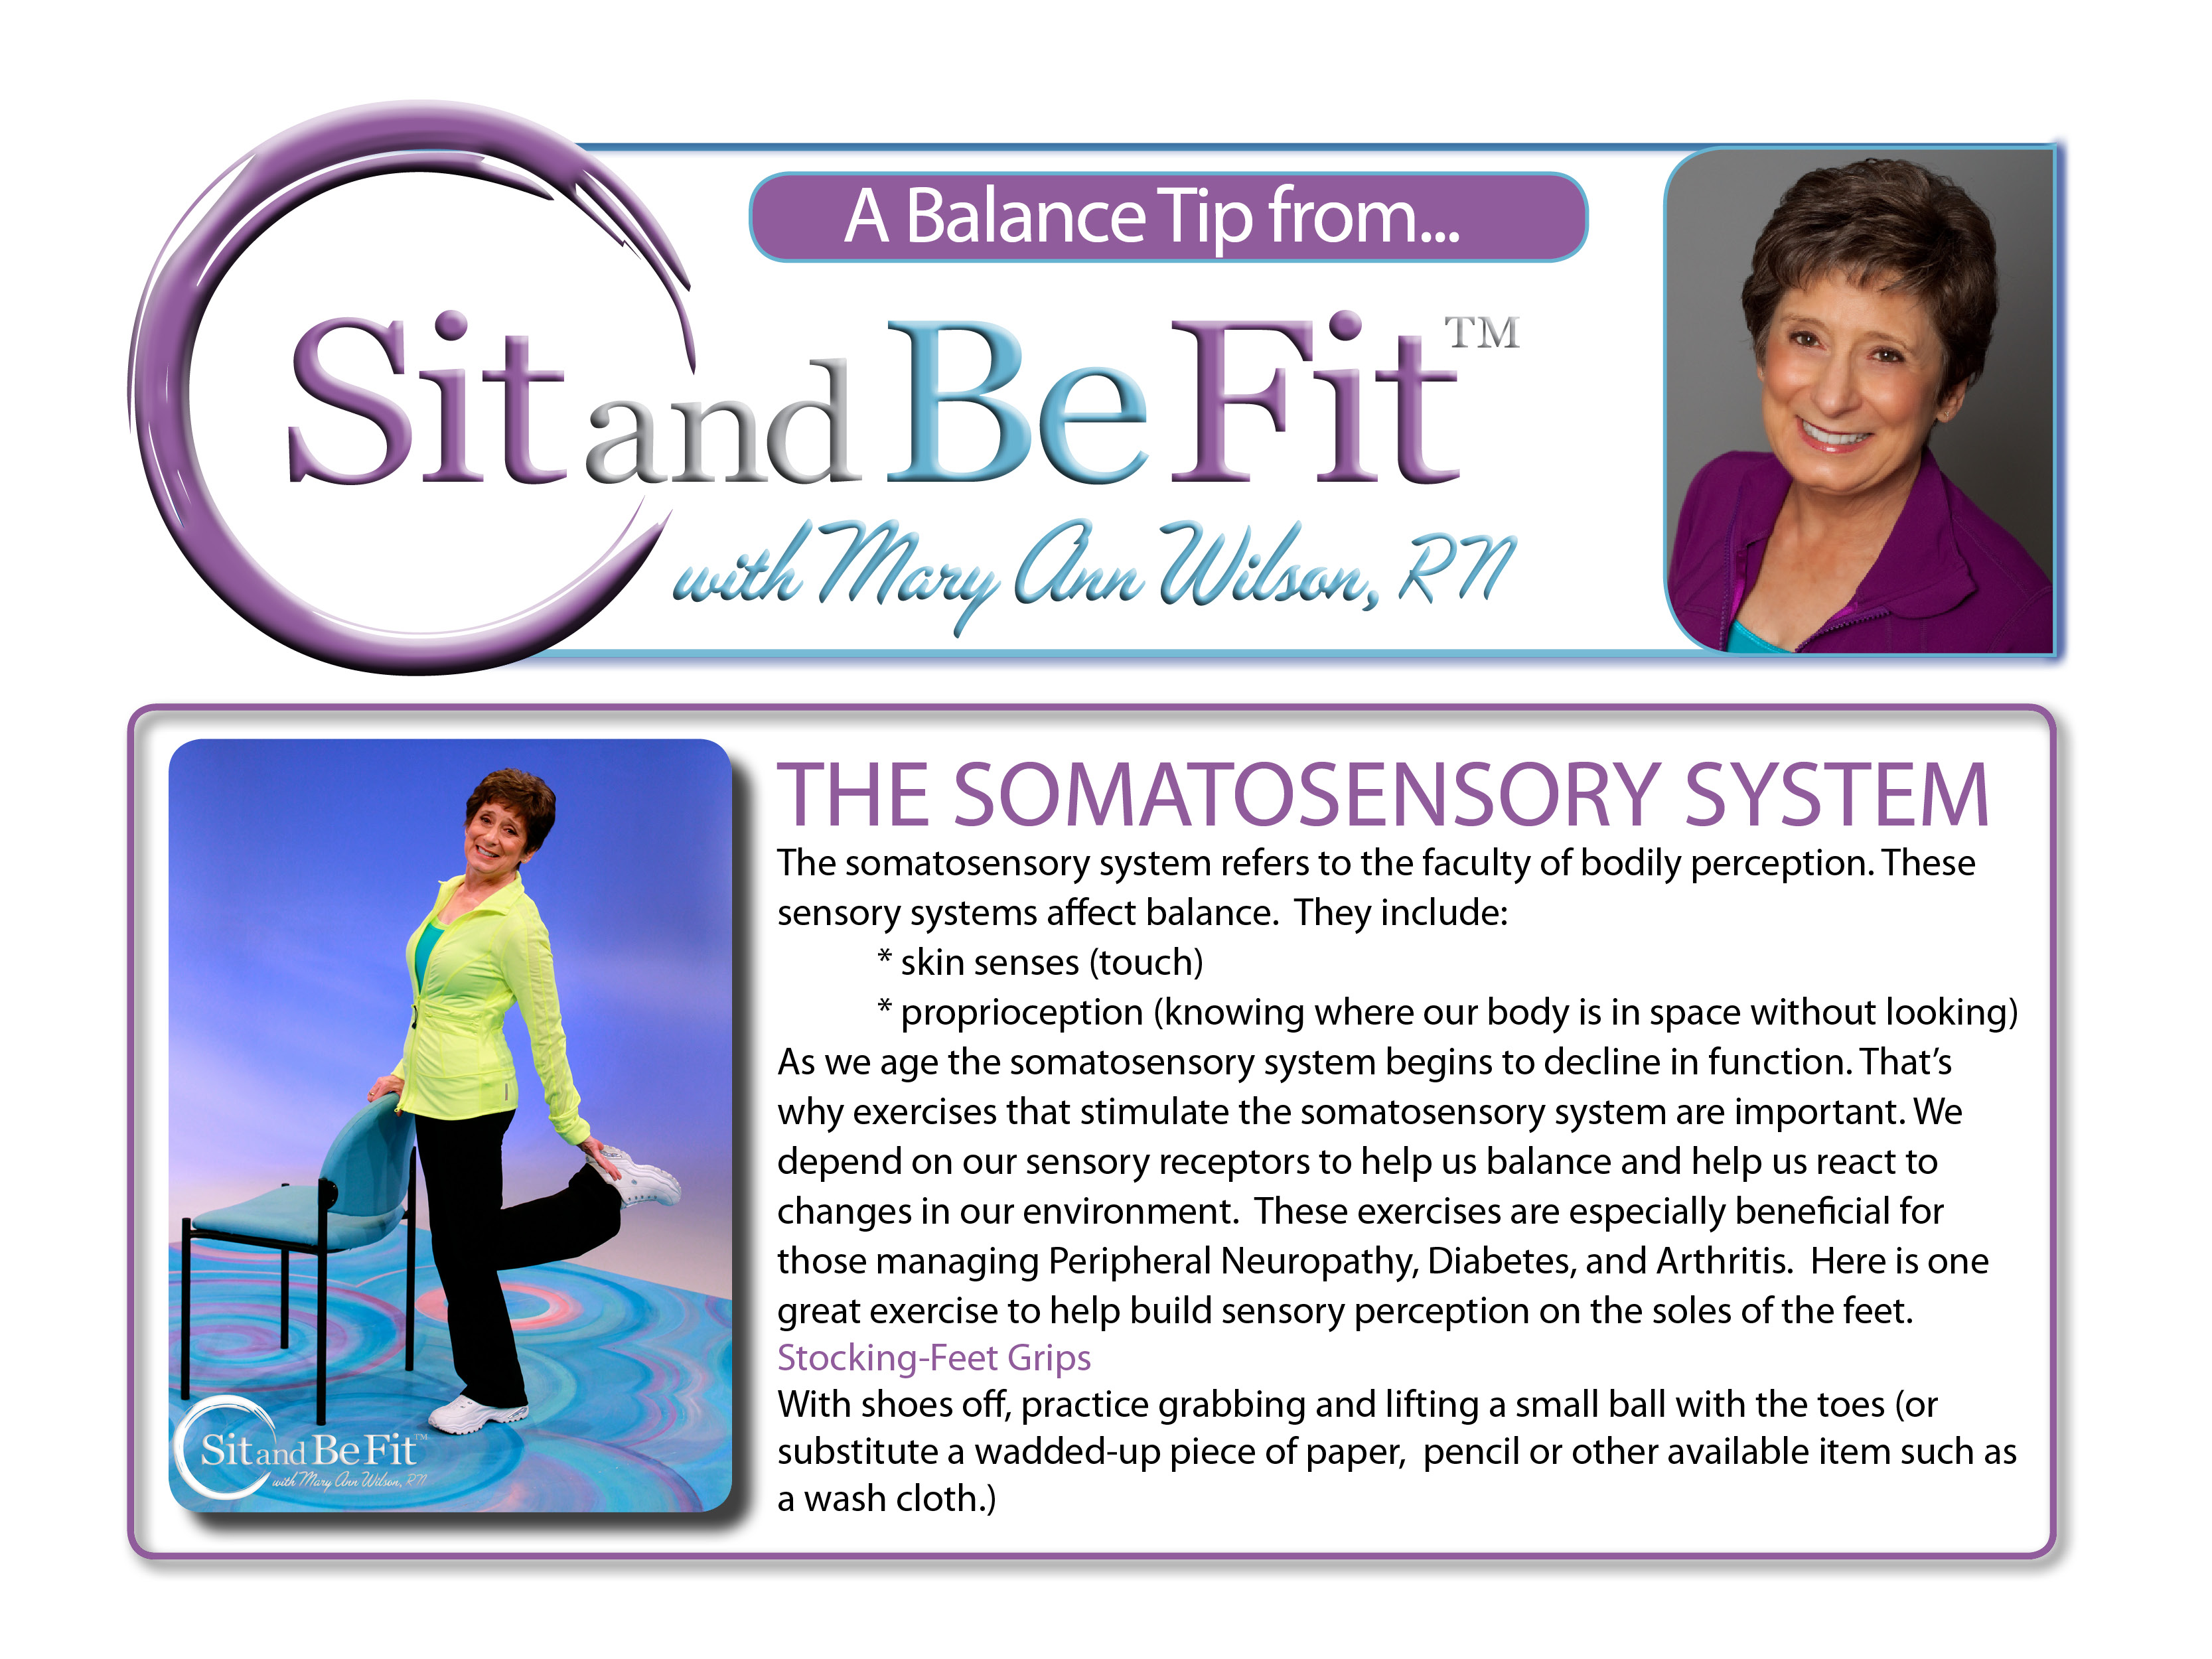 The Somatosensory System: Sit and Be Fit TV host, Mary Ann Wilson RN, shares balance tips.